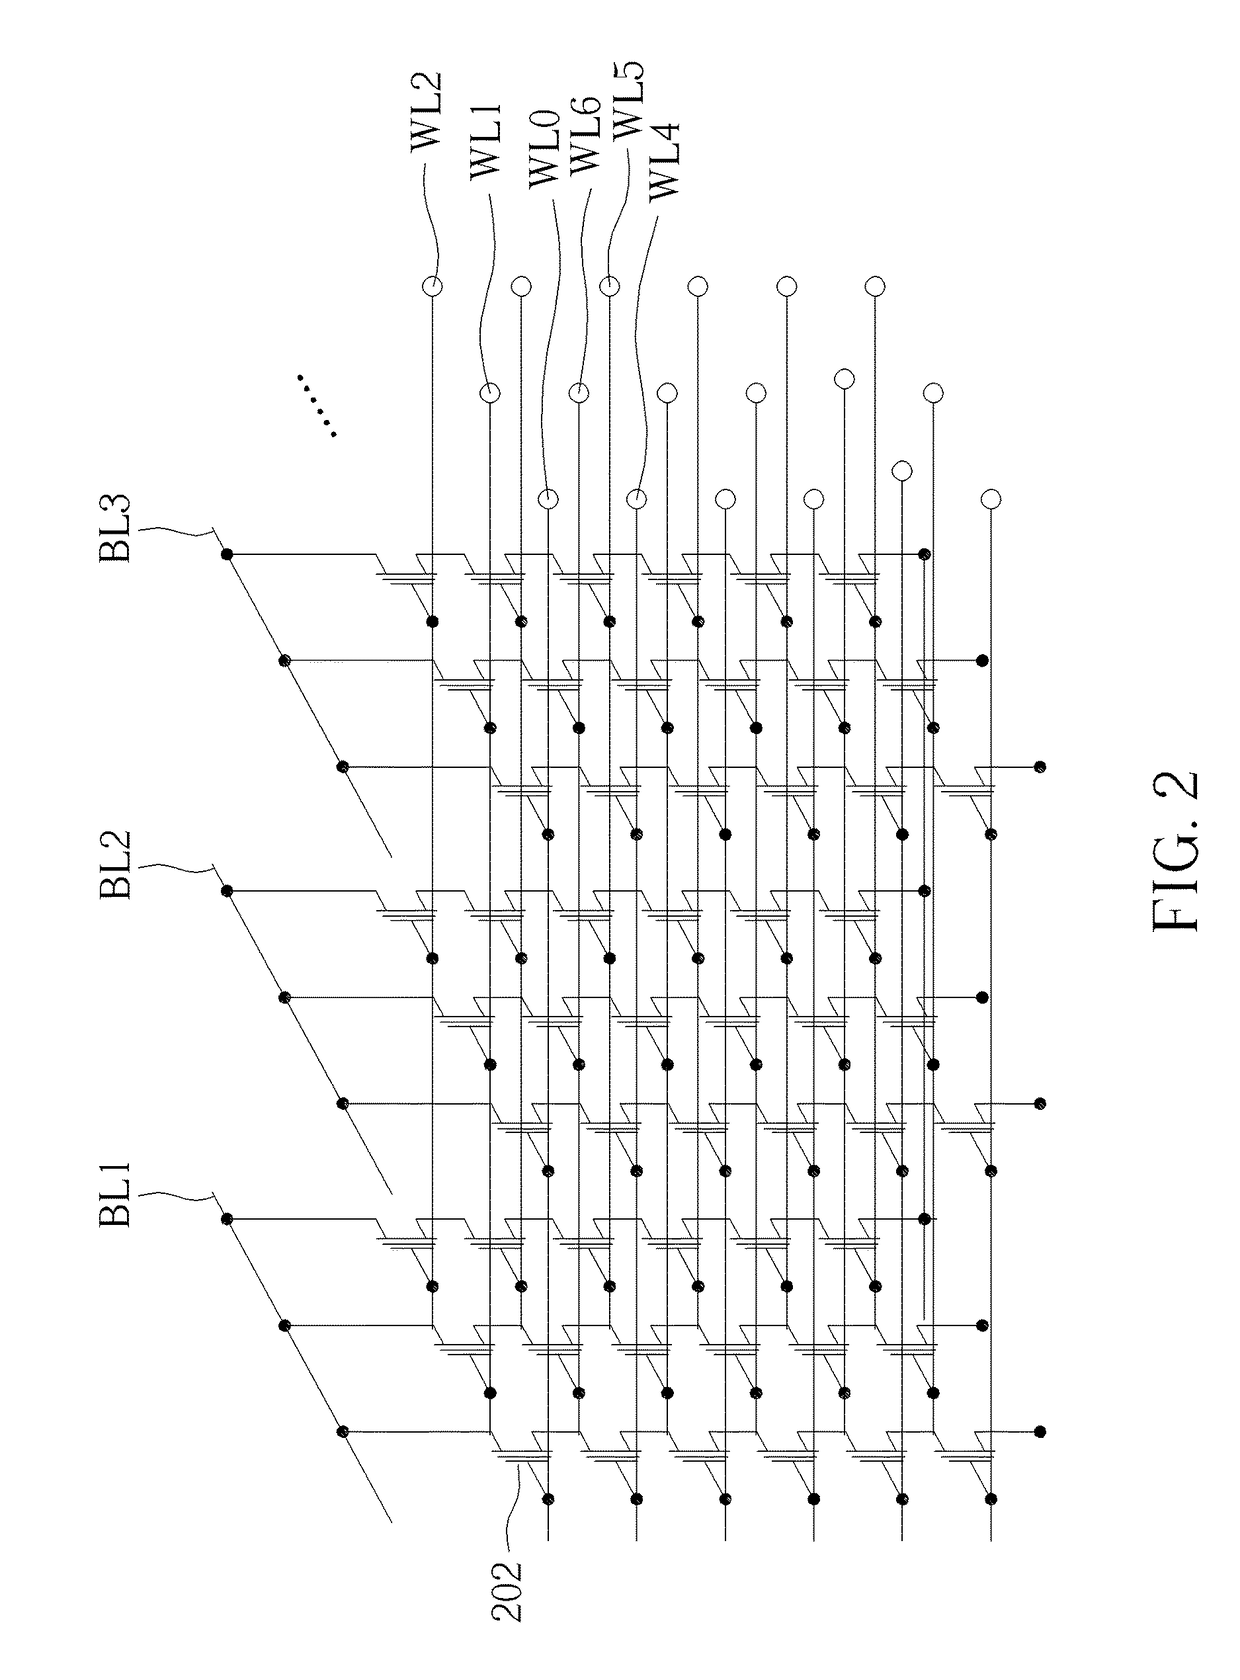 Method for accessing flash memory module and associated flash memory controller and memory device